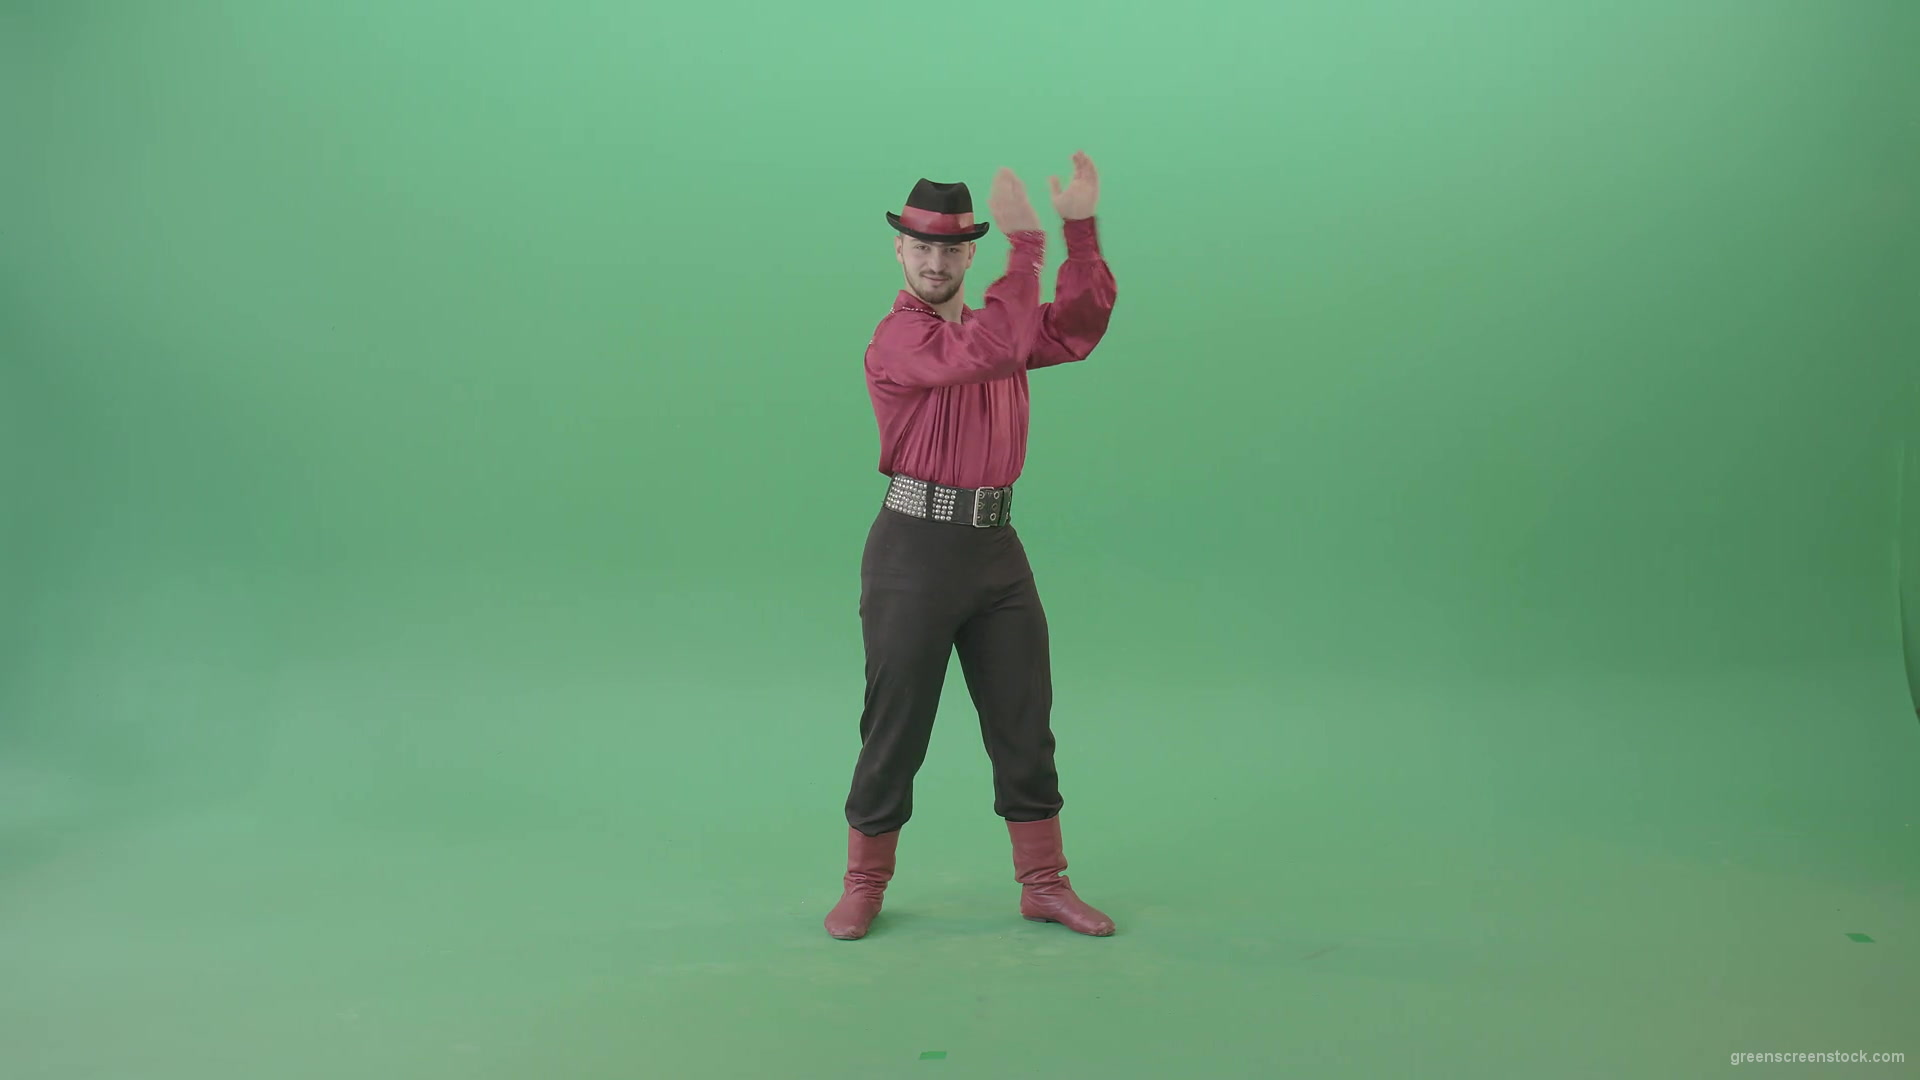 Modovian-Balkan-Gipsy-man-clapping-hands-isolalated-on-green-screen-4K-Video-Footage-1920_004 Green Screen Stock